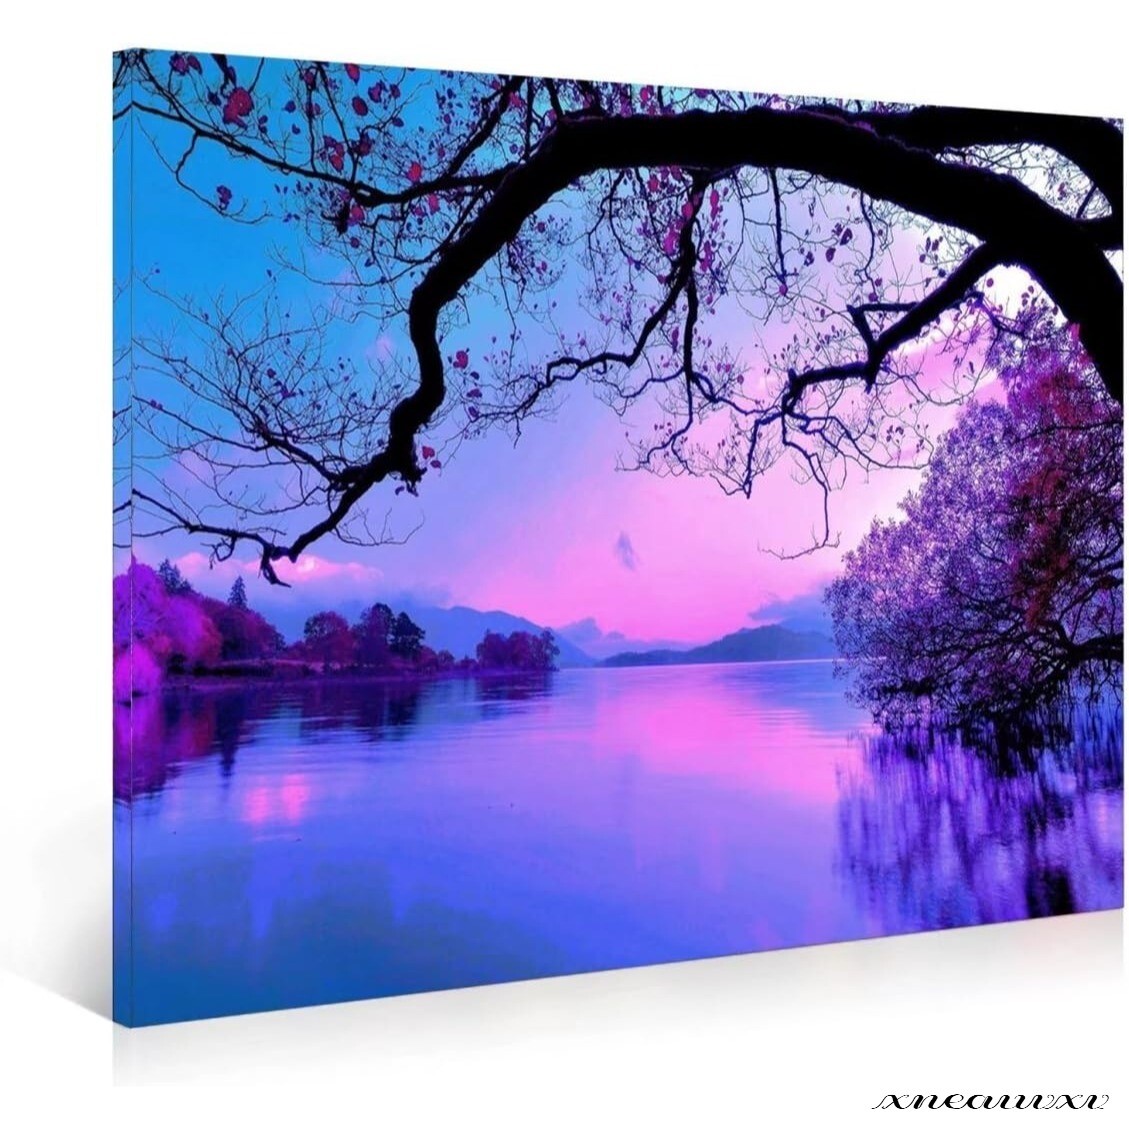 Fantastic art panel, dawn, natural scenery, spectacular view, interior, wall hanging, room decoration, decoration, canvas, painting, stylish, art, appreciation, redecoration, housewarming gift, Artwork, Painting, graphic